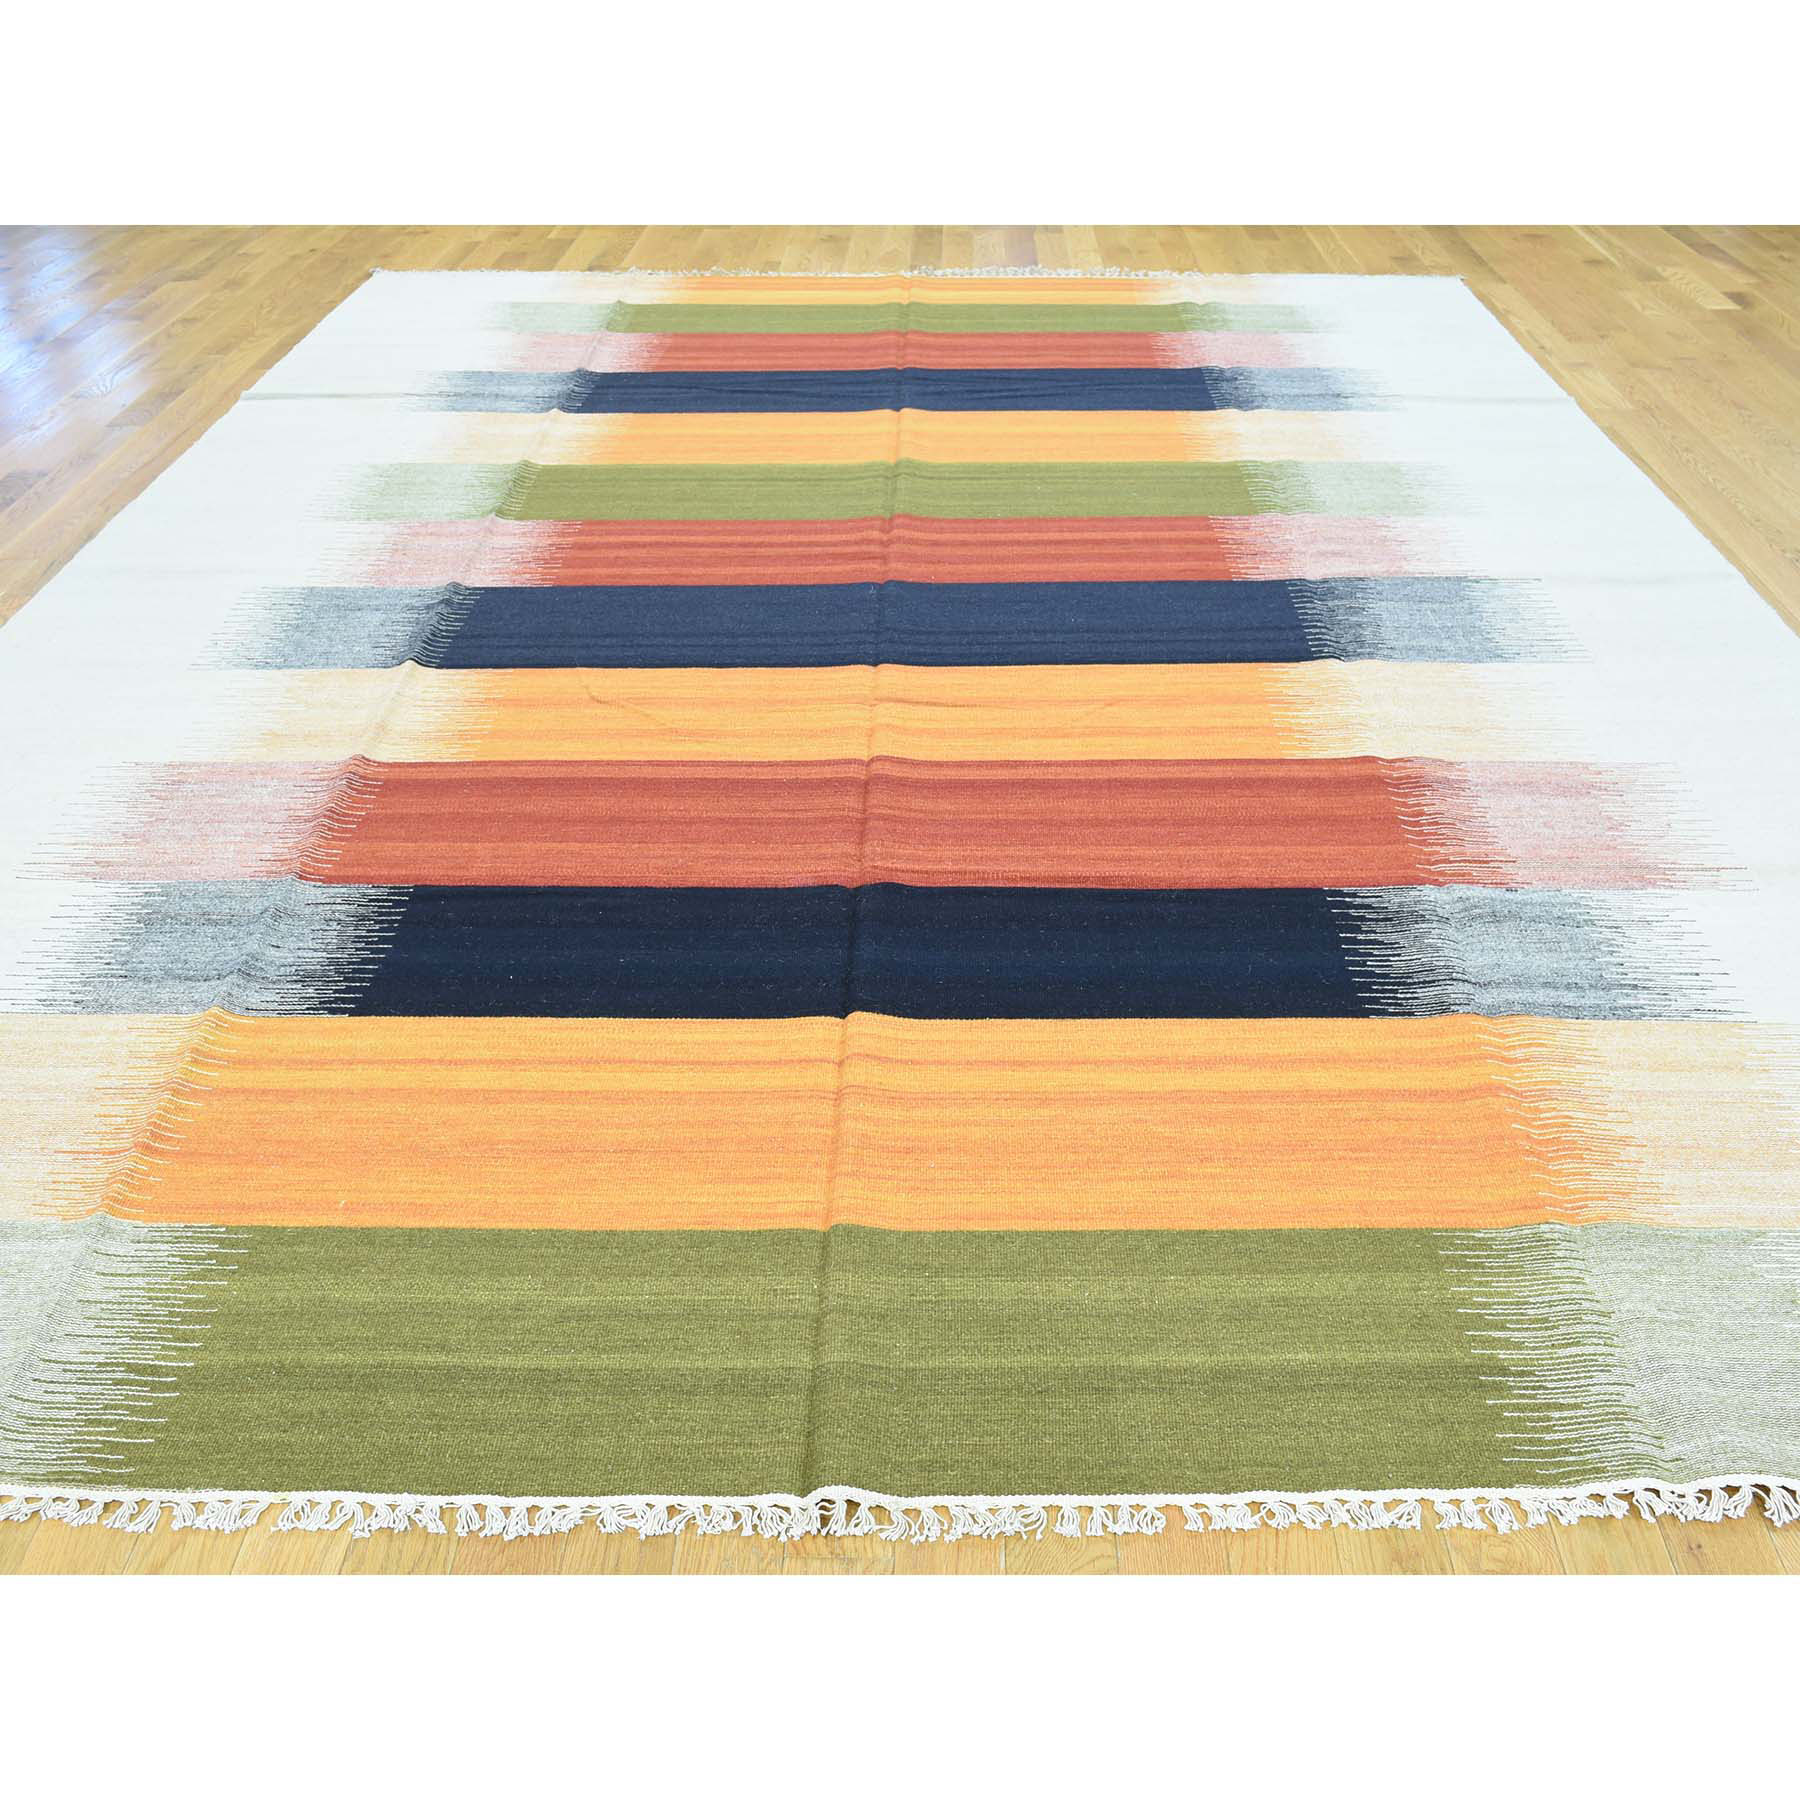 9'x12'6" Hand-Woven Colorful Flat Weave Reversible Durie Kilim Carpet 